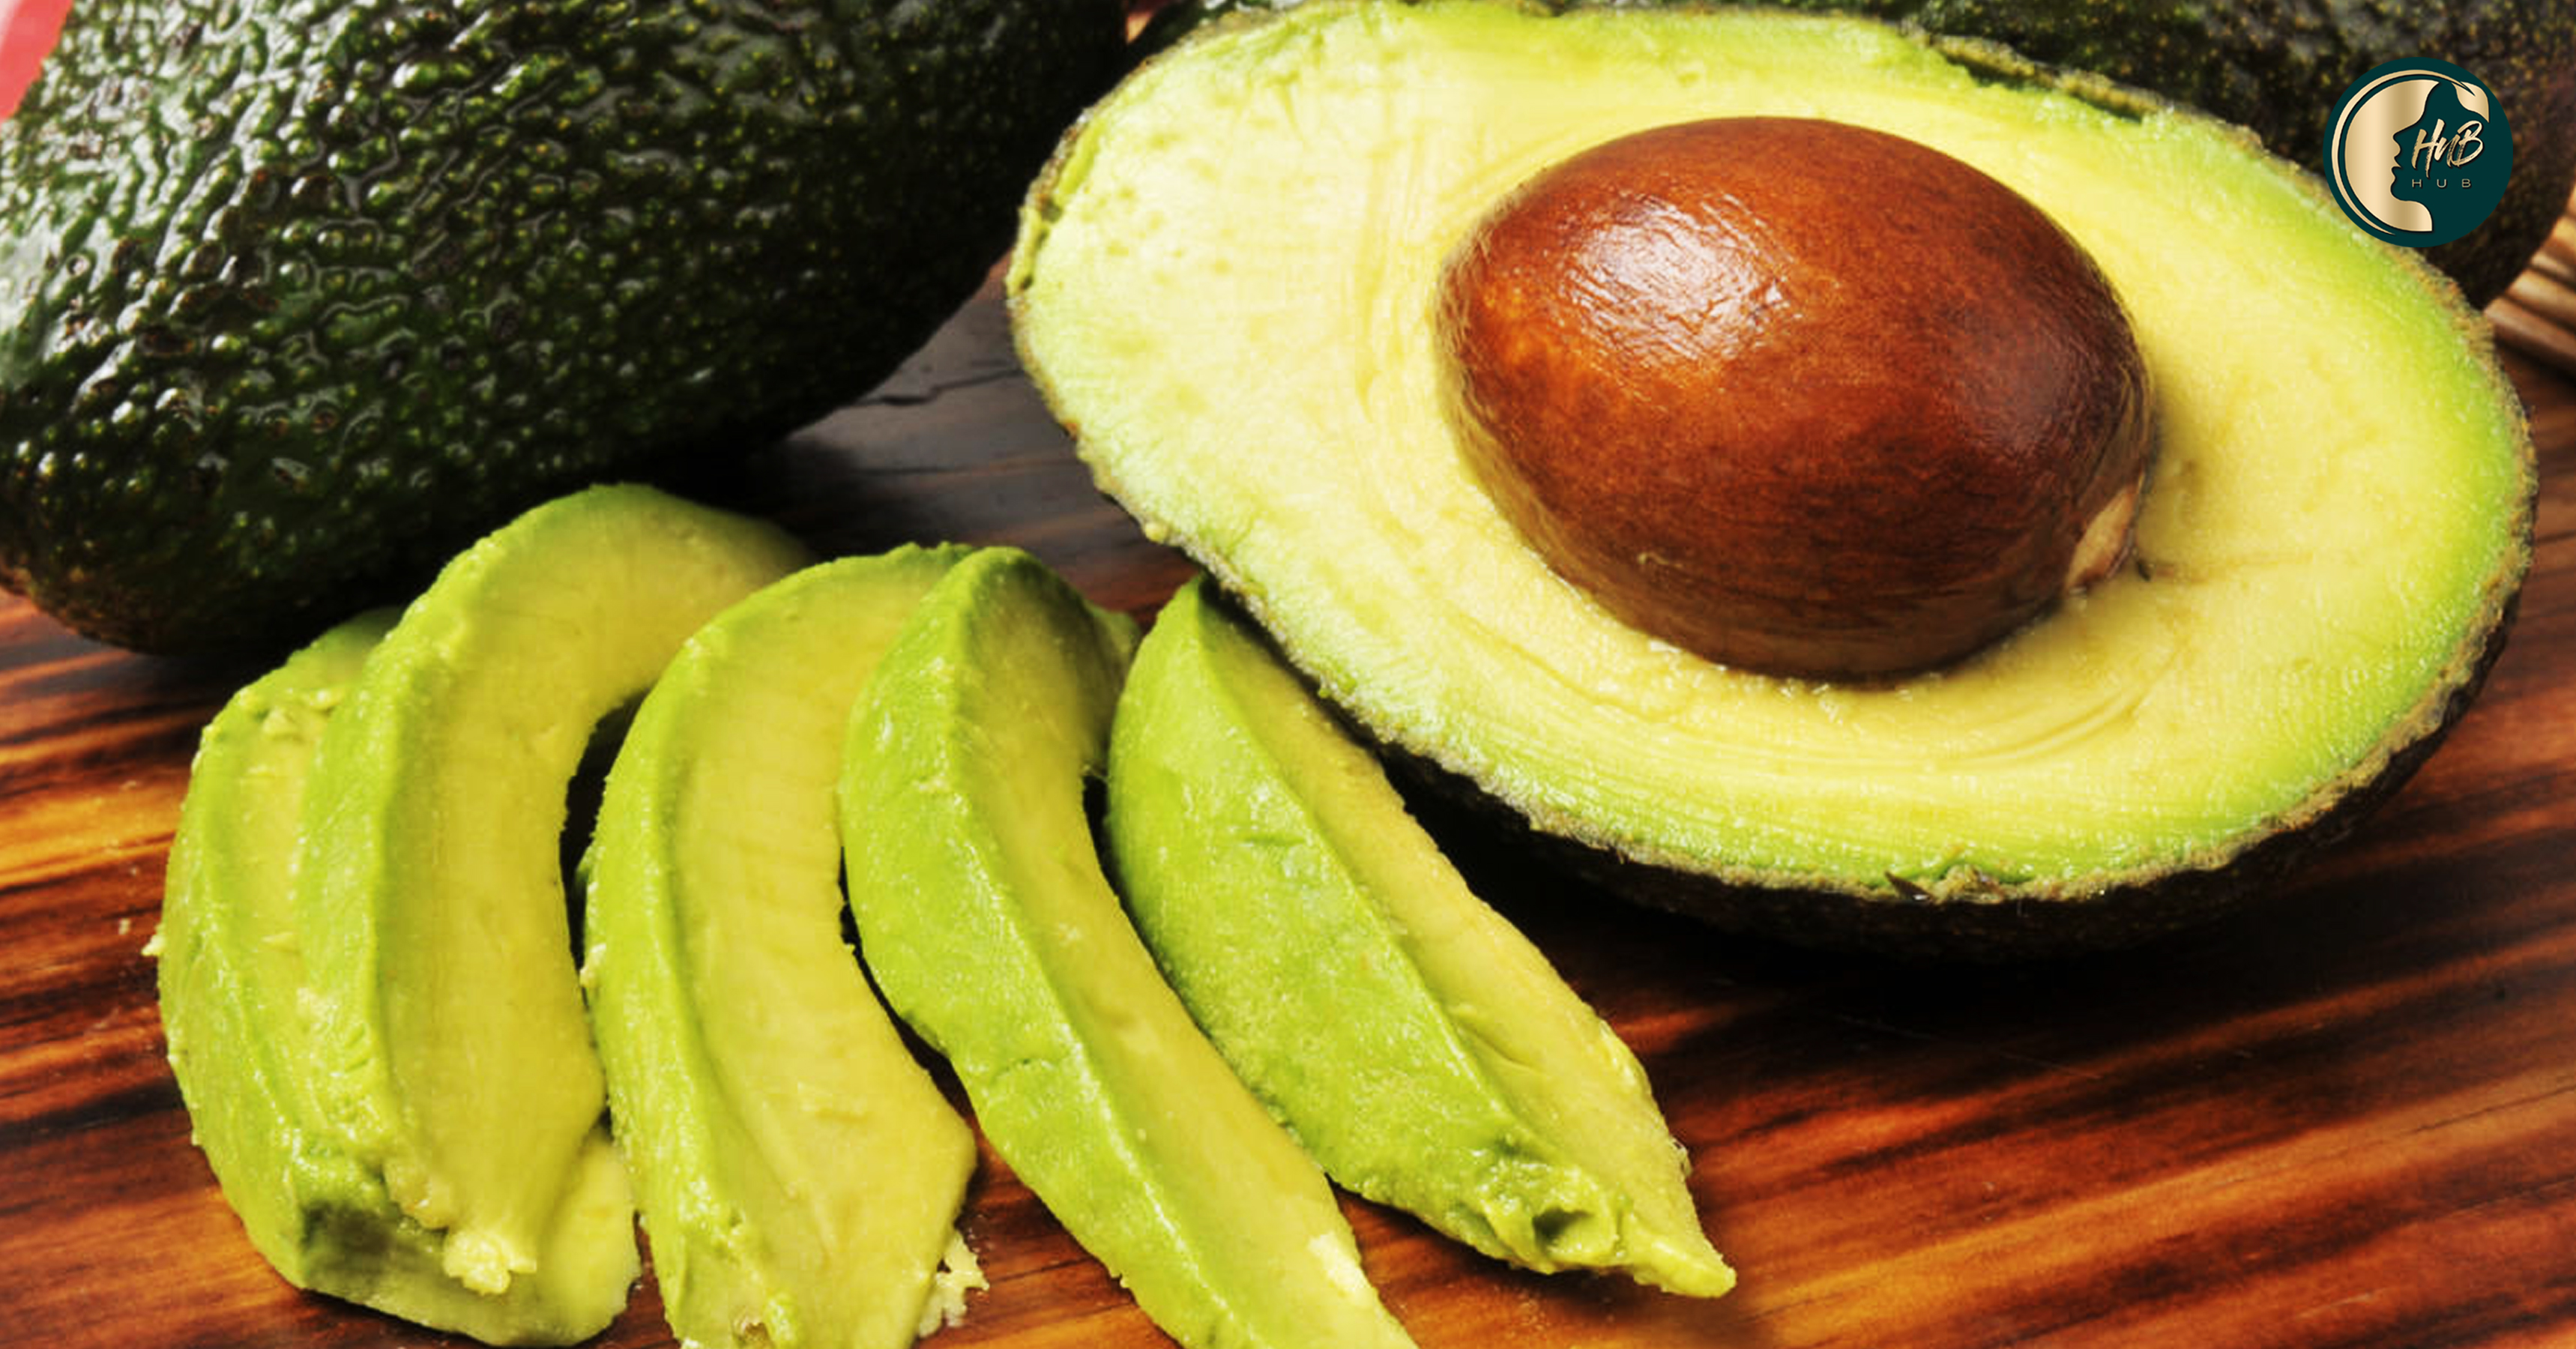 Avocado for new Growing and Strong Hair! Health n Beauty HuB